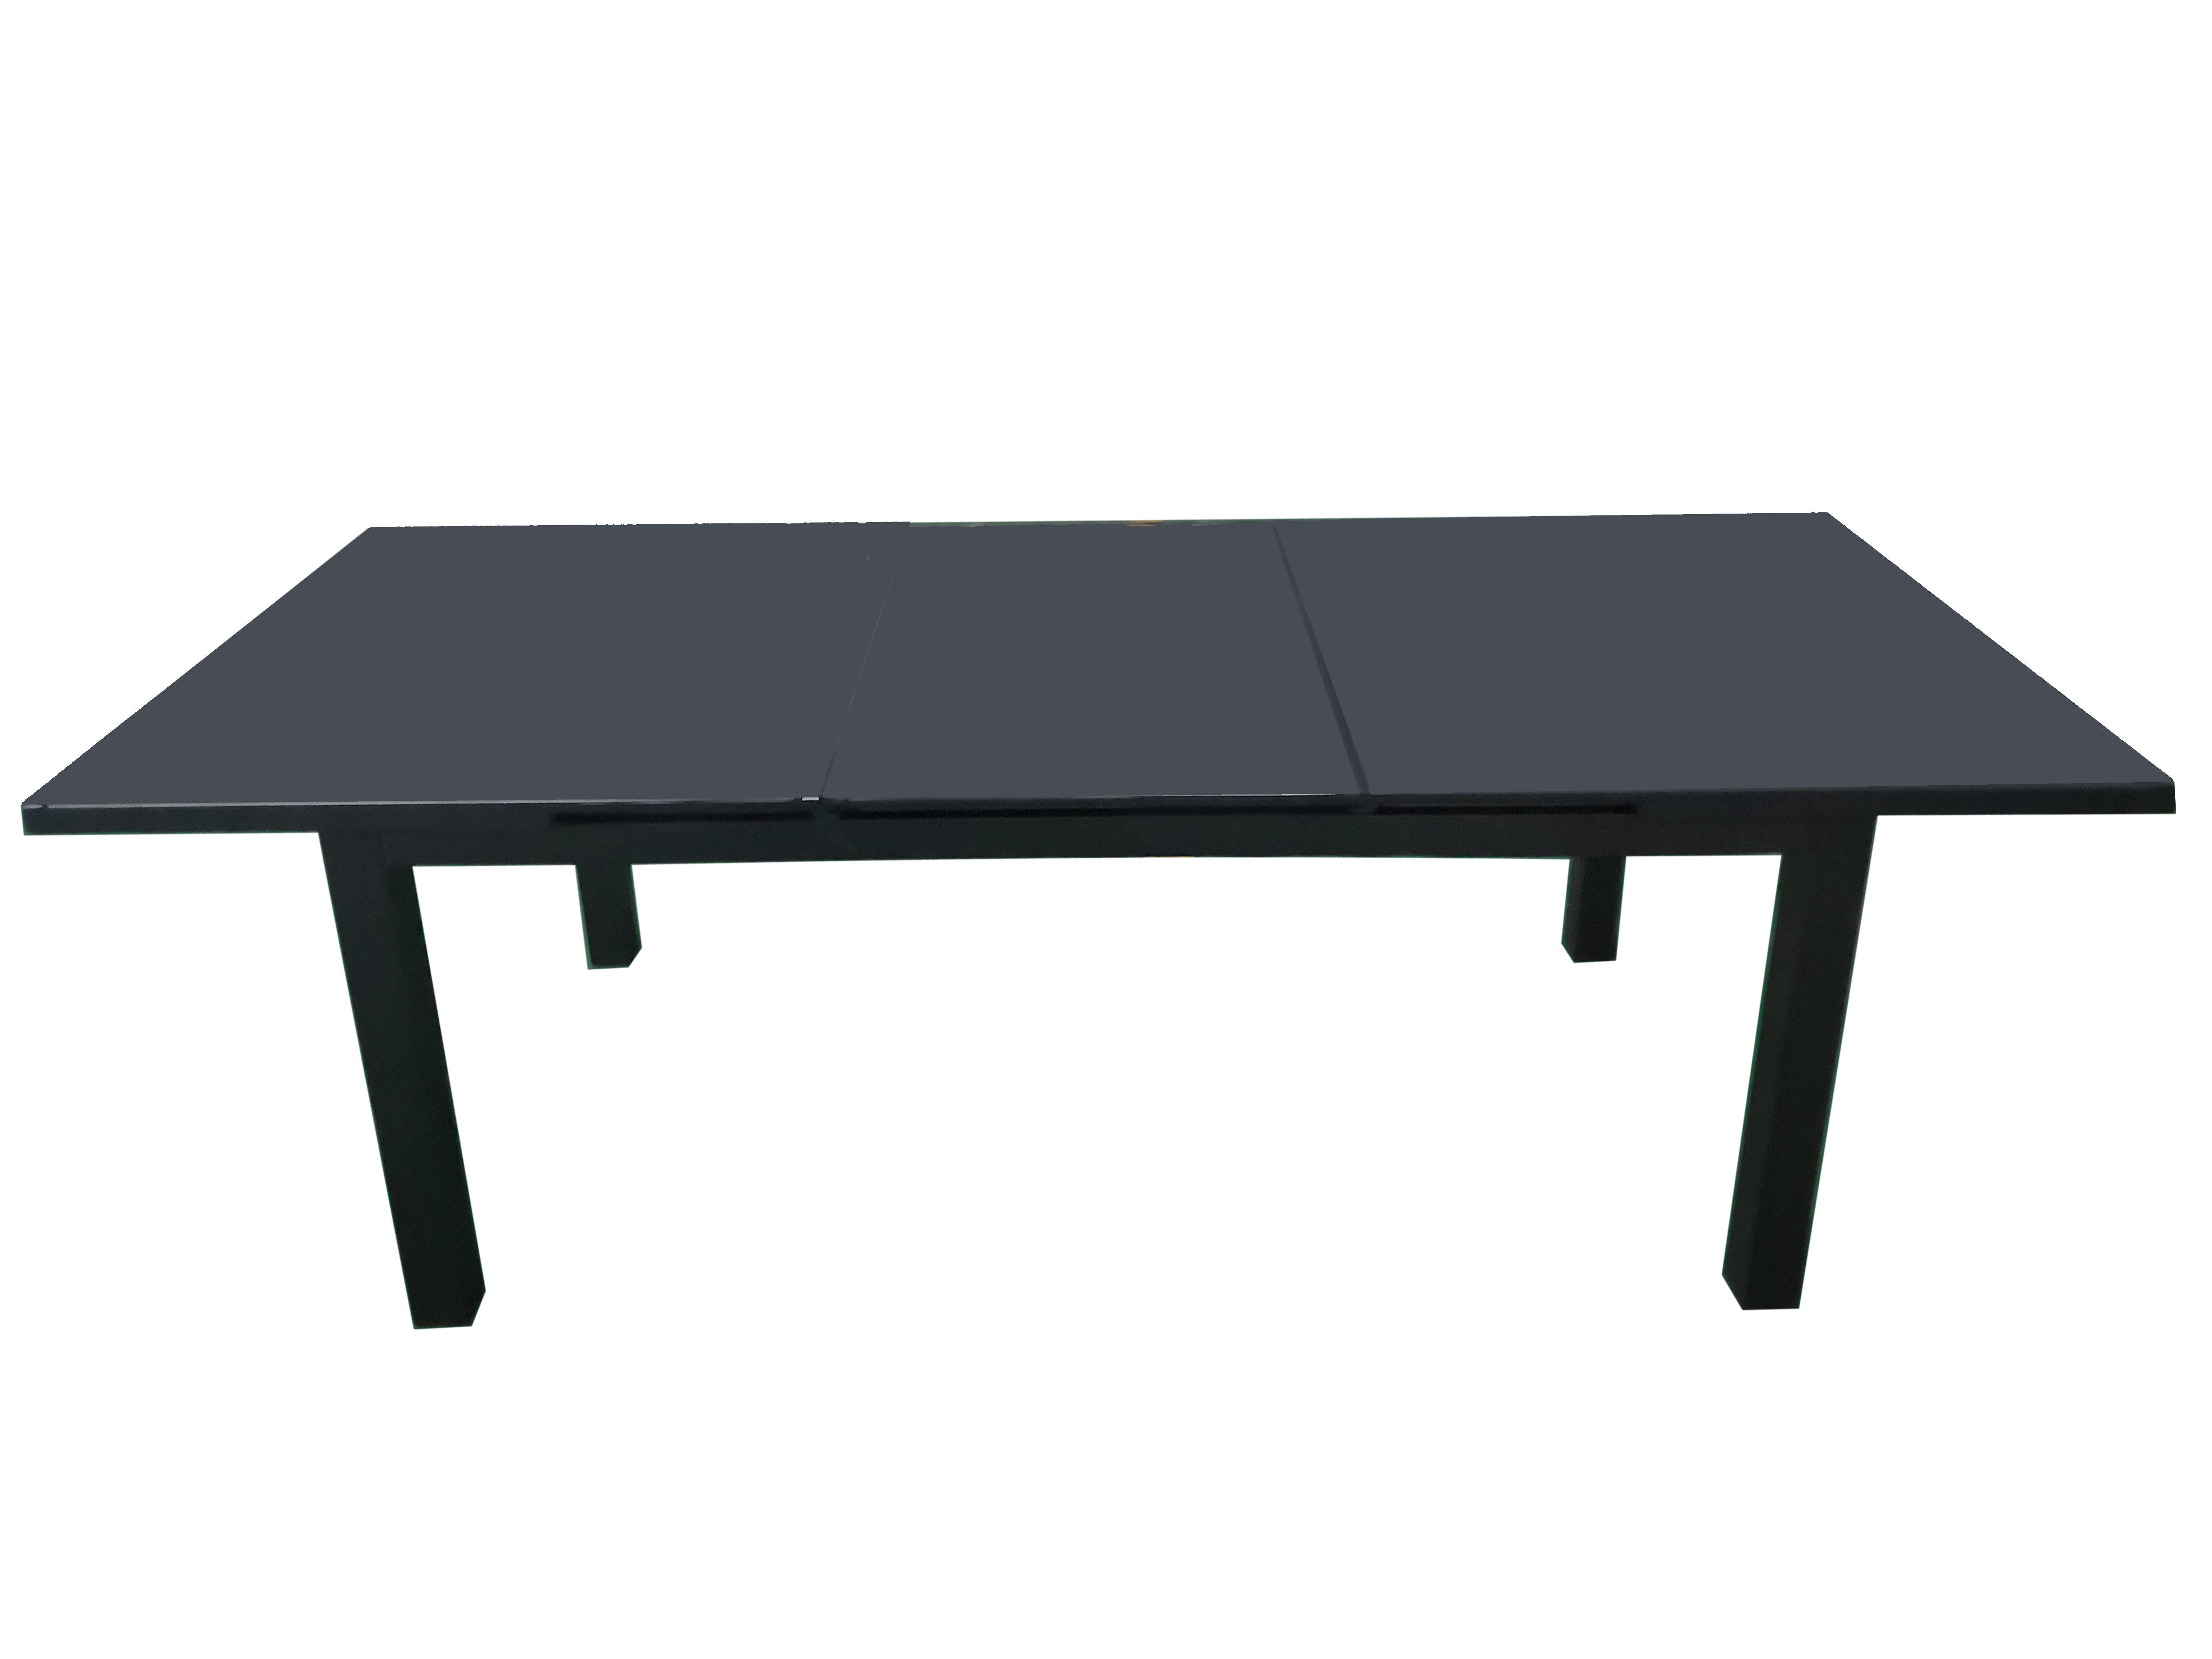 MOSS MOSS-102NC - Akumal Collection, Black matte aluminum extendable table with black aluminum slats and up/down sliding mechanism 71"(95" with extension) x 39" x H 29.1"